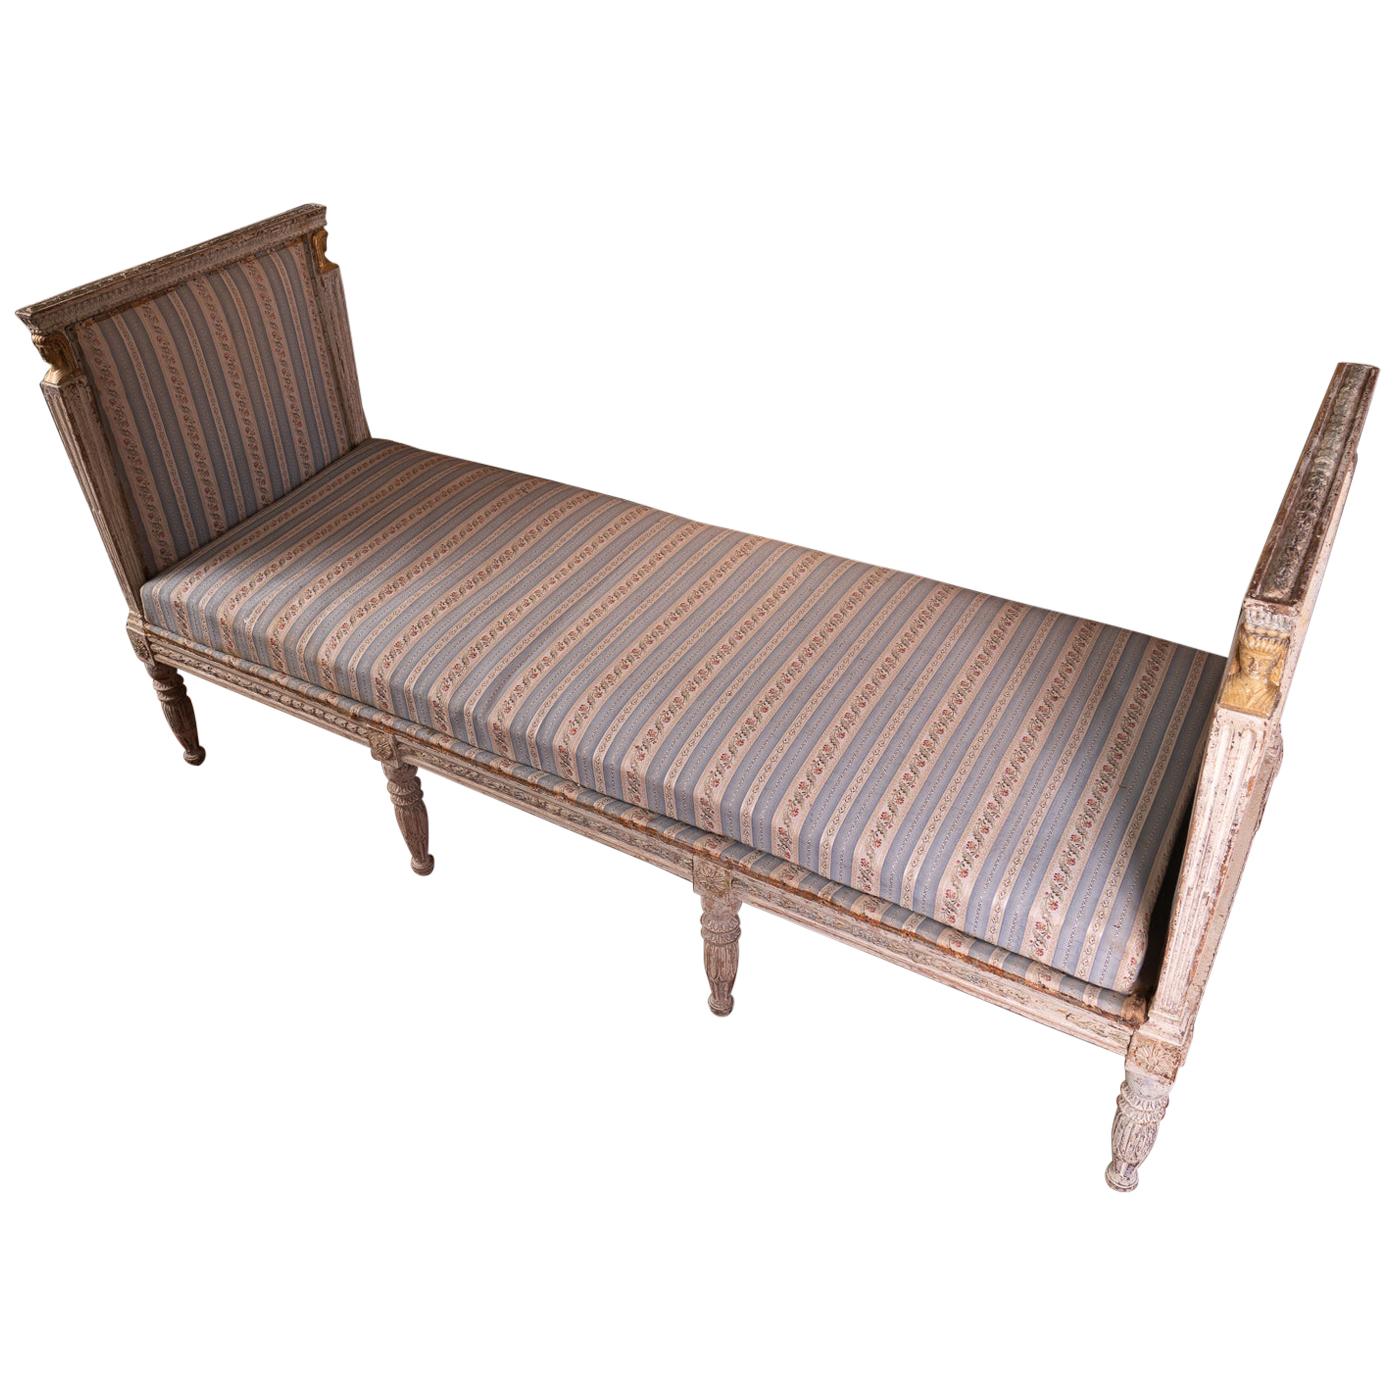 Exceptional 18th Century Swedish Daybed For Sale